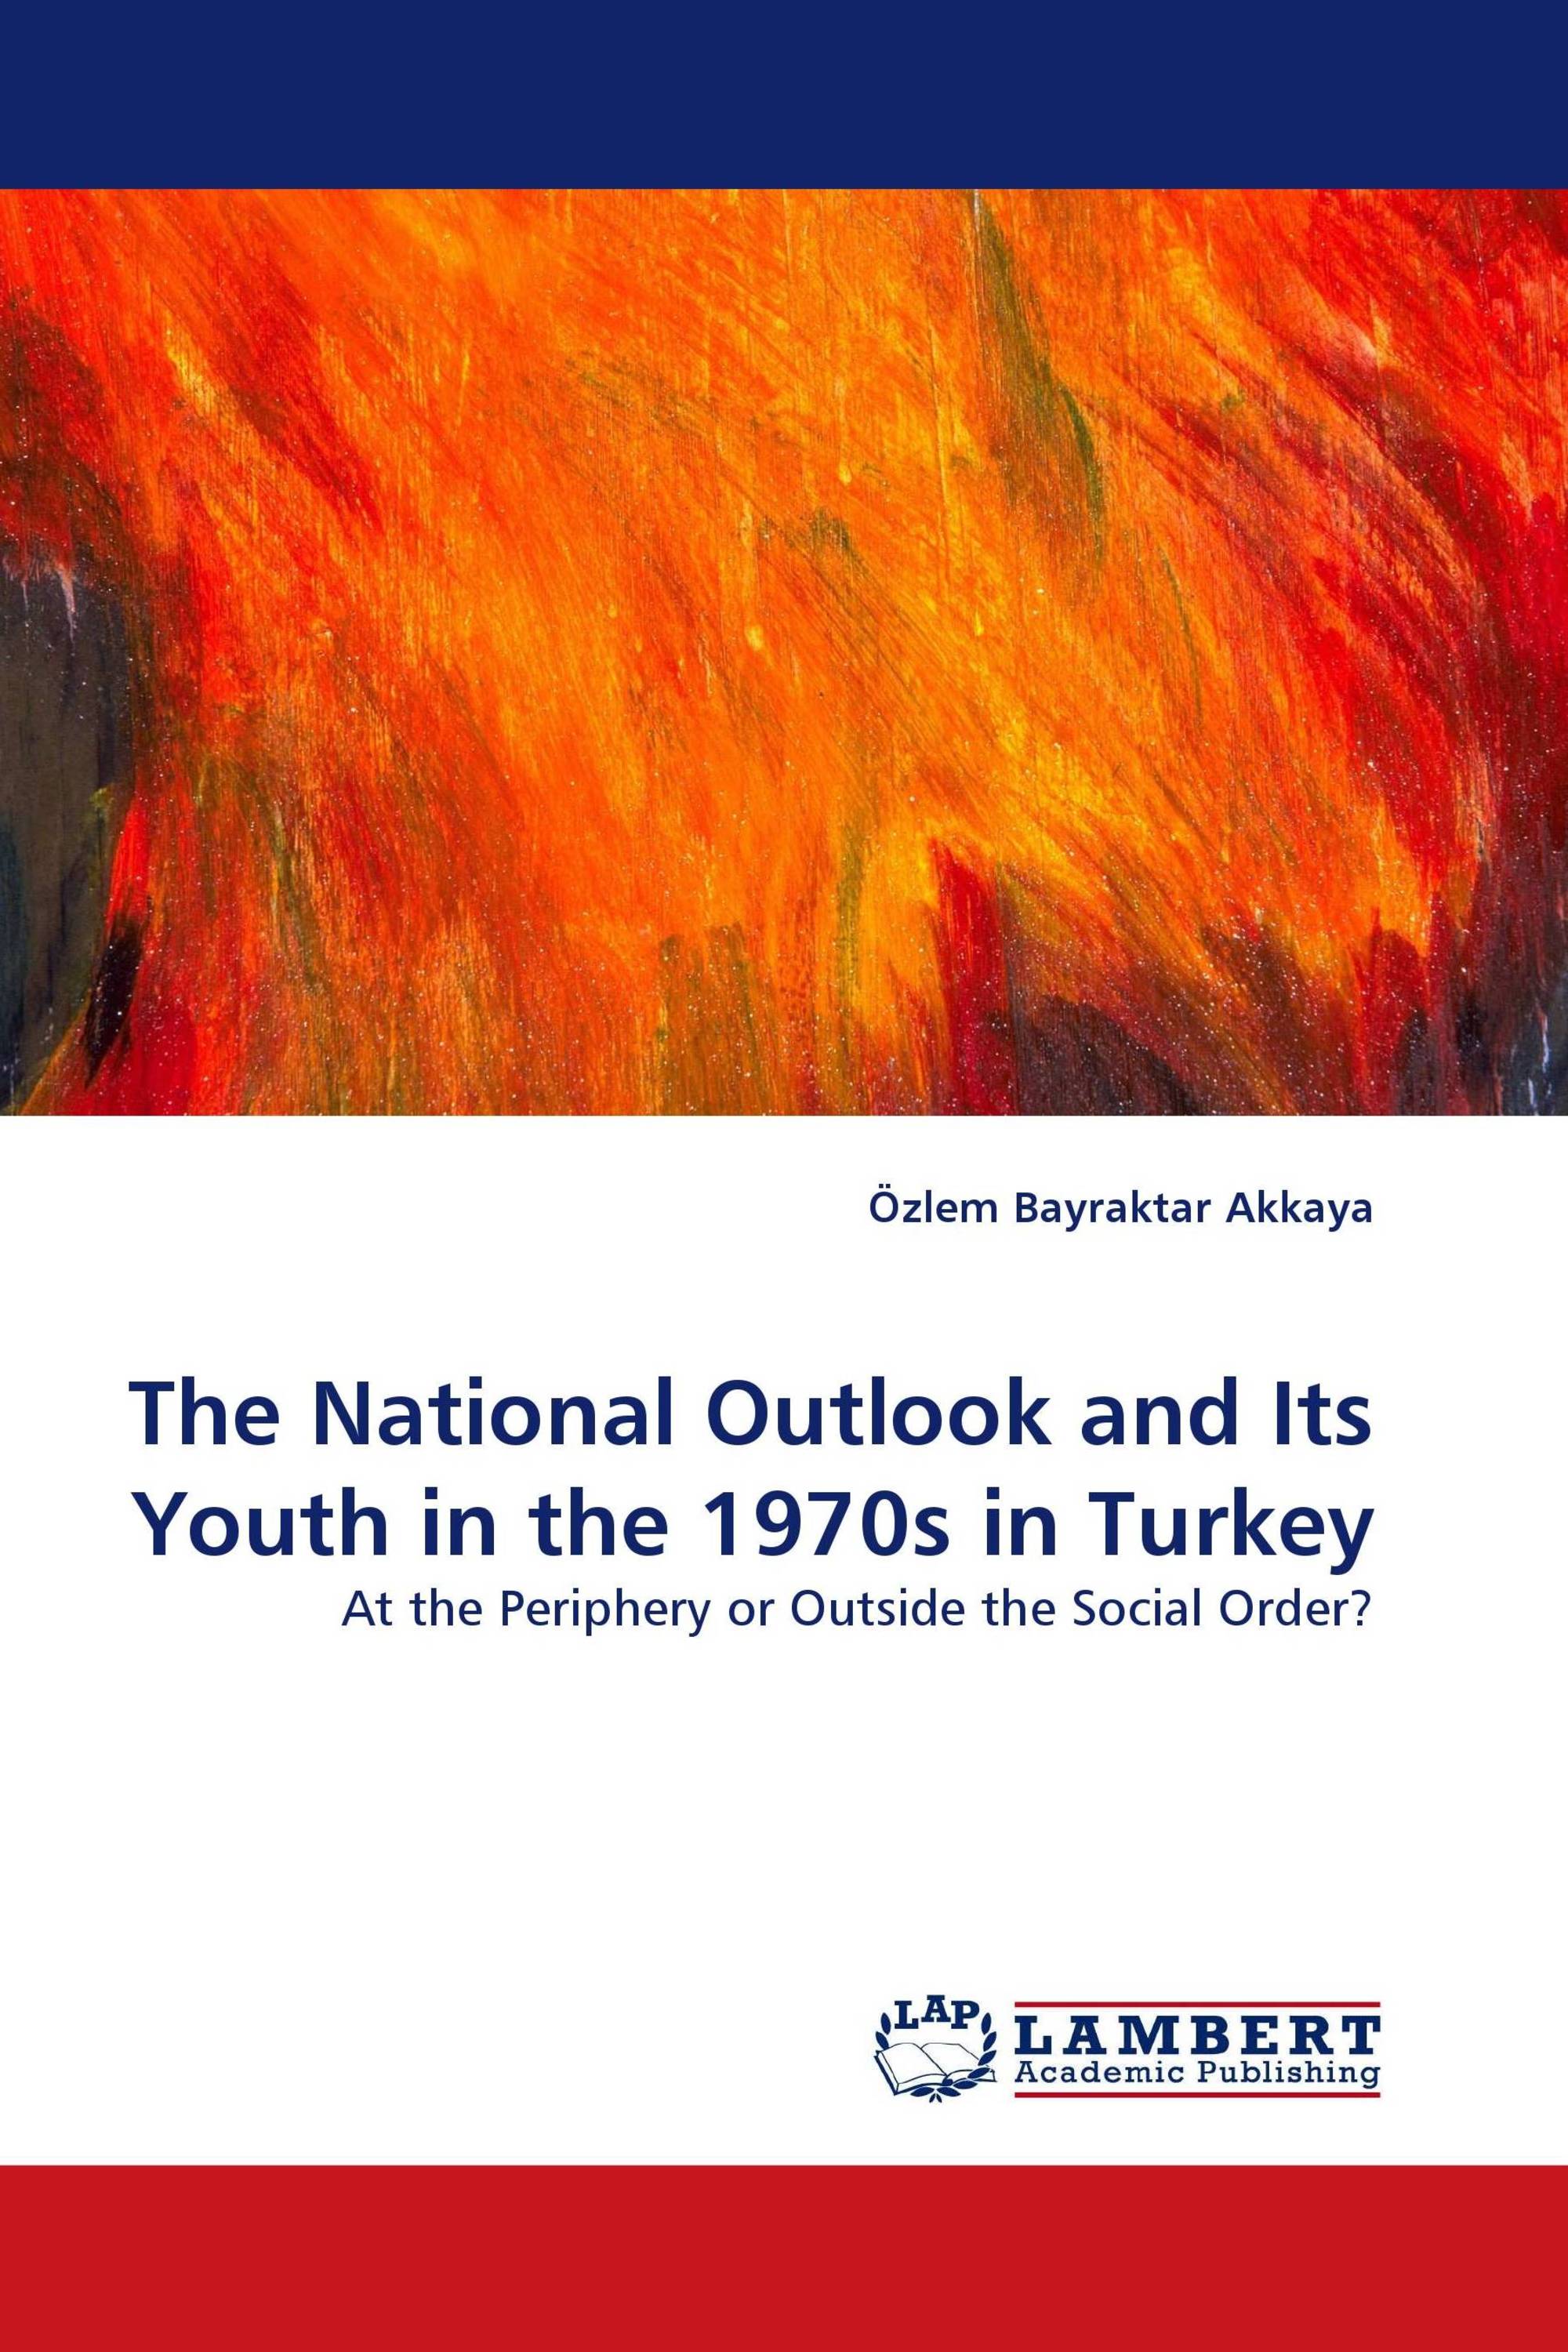 The National Outlook and Its Youth in the 1970s in Turkey